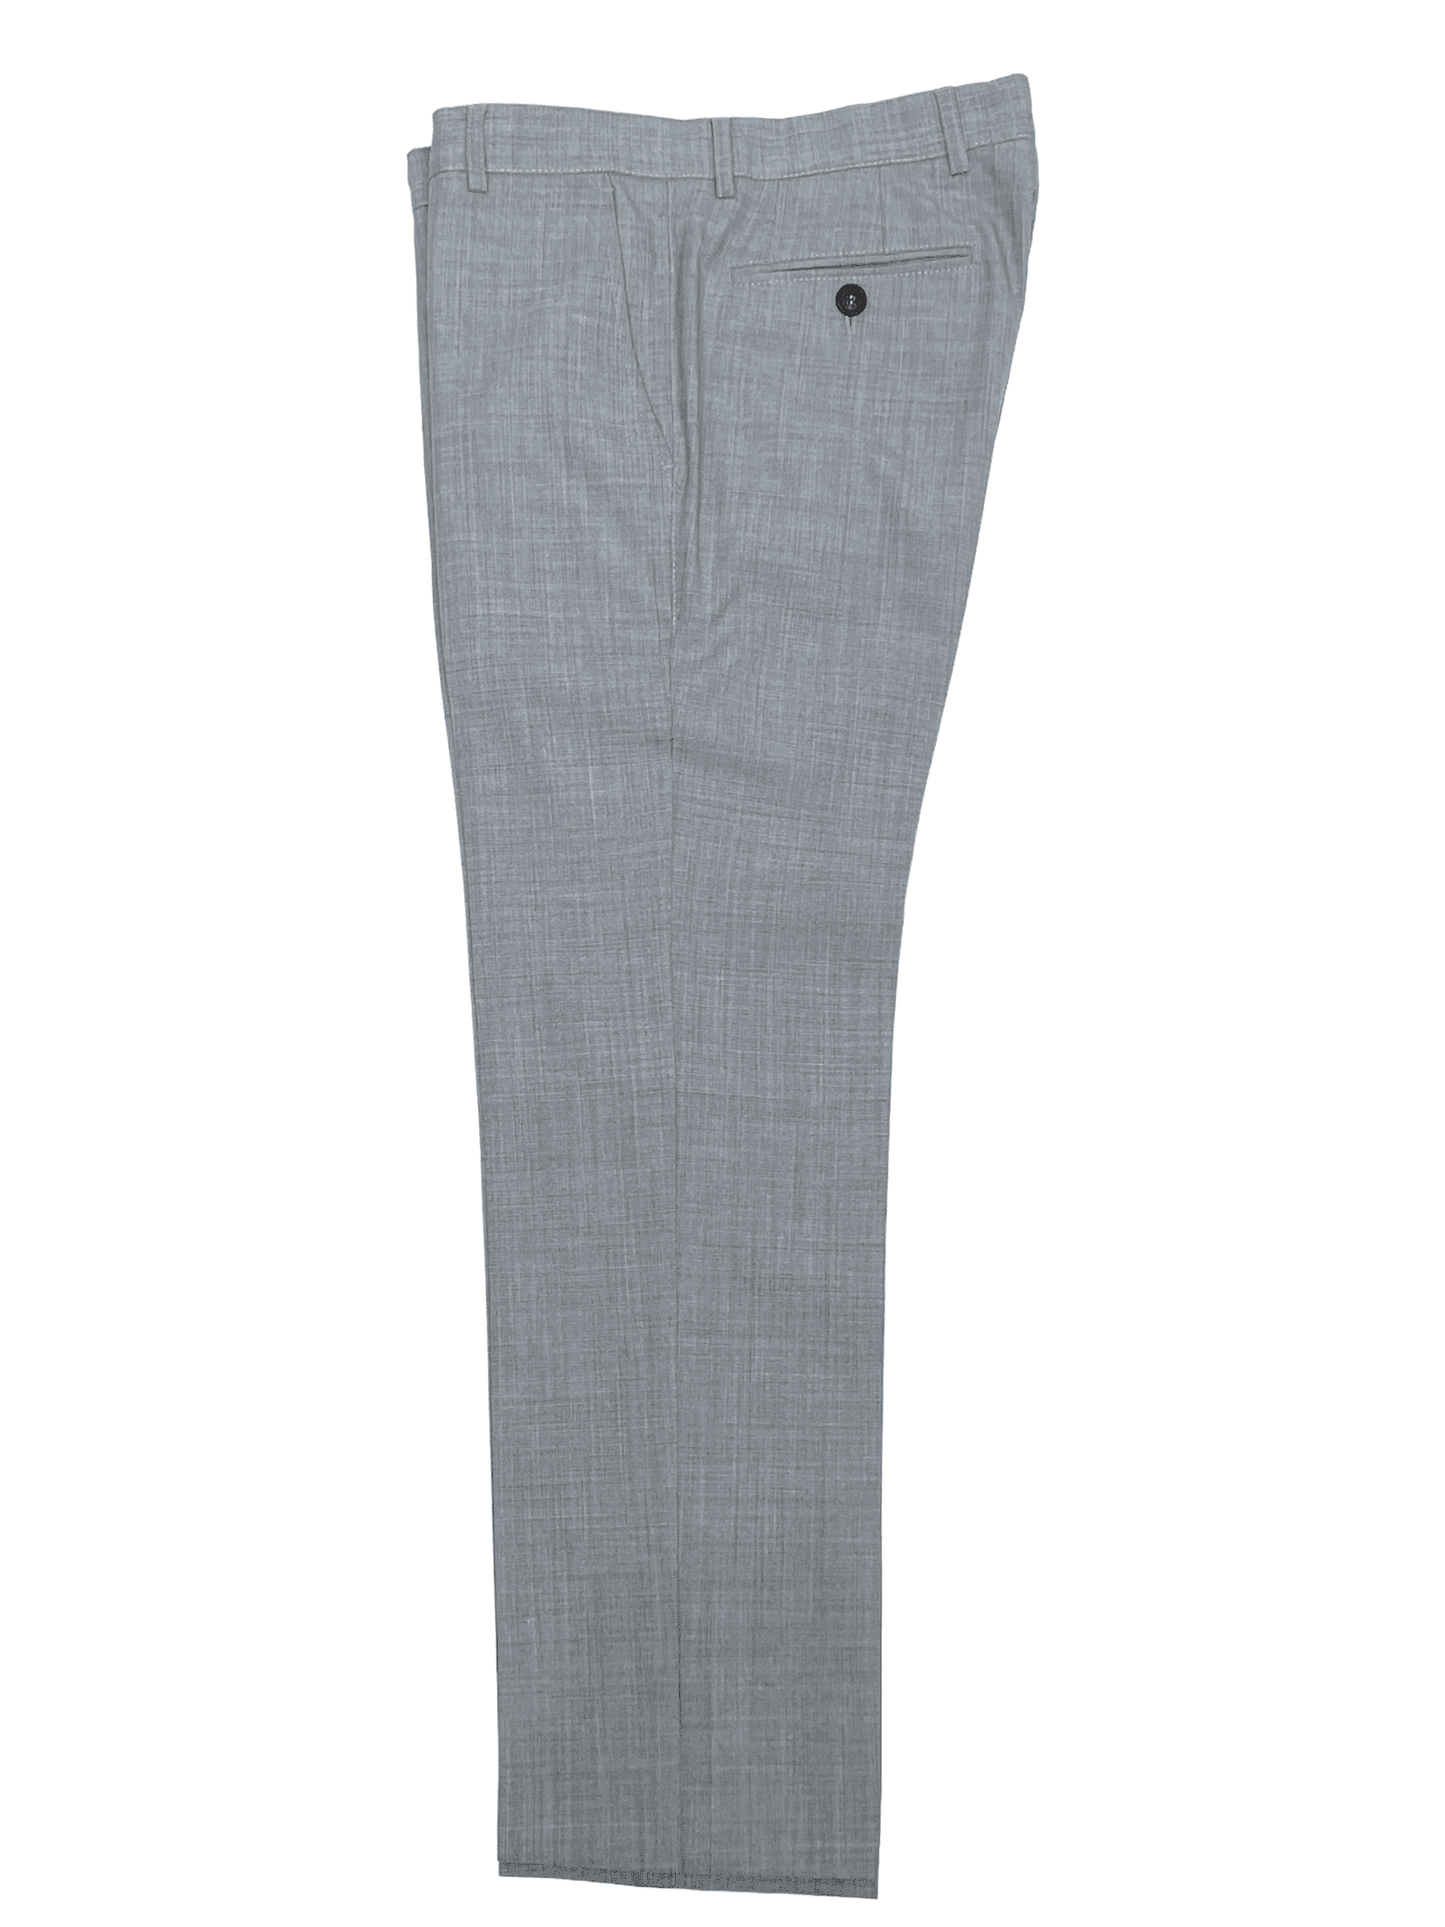 Brunello Cucinelli Grey Dress Pants 30W 27L - Genuine Design Luxury Consignment Calgary, Alberta, Canada New and Pre-Owned Clothing, Shoes, Accessories.